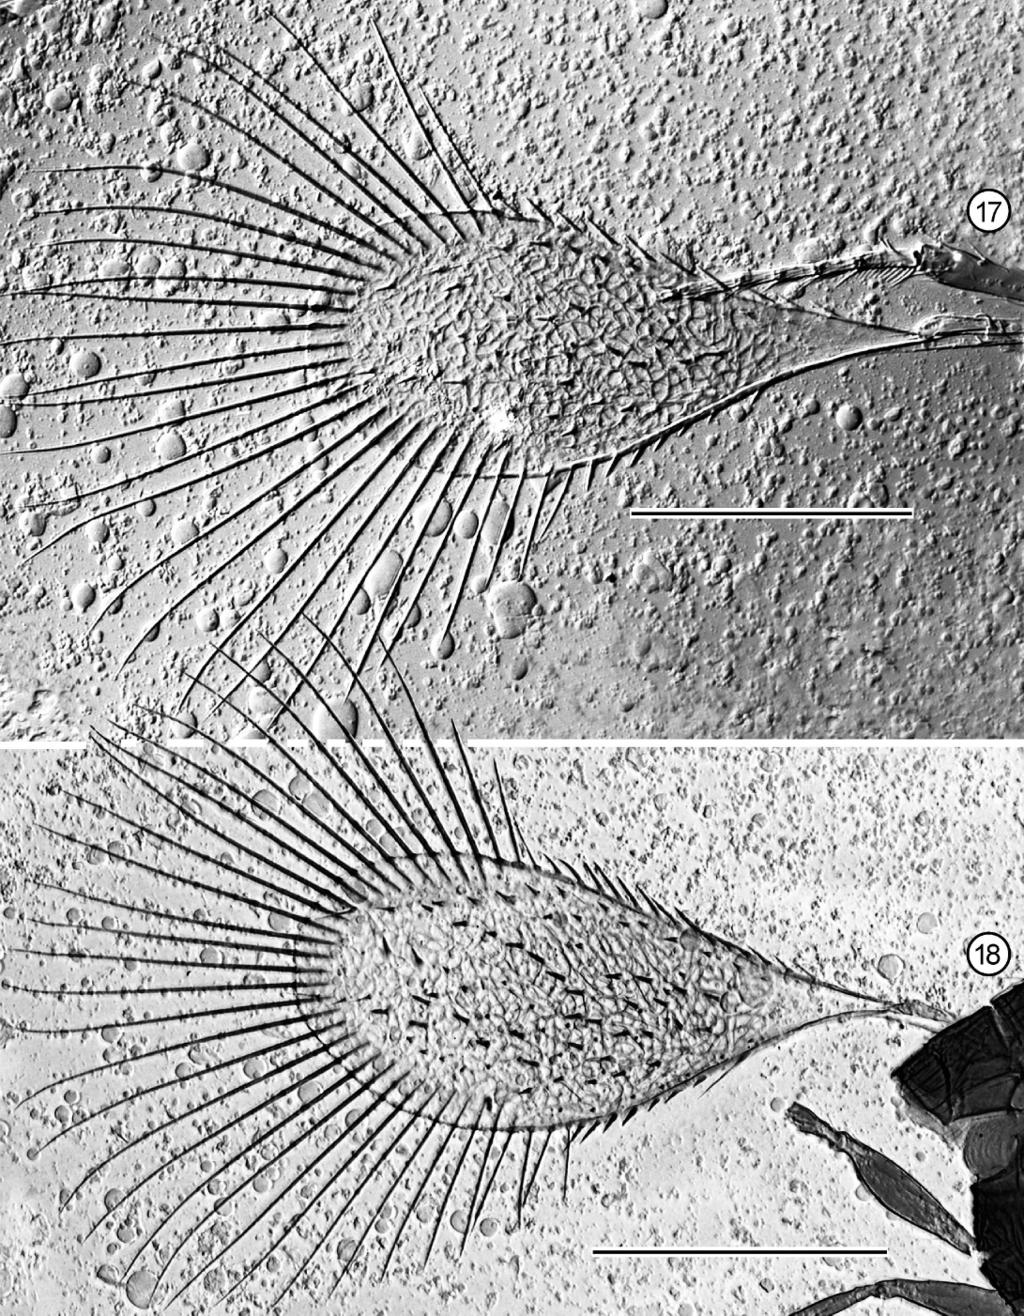 VOLUME 17, NUMBER 2, 2008 183 Figs 17, 18. Mymaromella chaoi, fore wings. 17, holotype; 18, paratype. Scale lines 5 50 mm. basal three-quarters of anterior and posterior margins beyond venation.